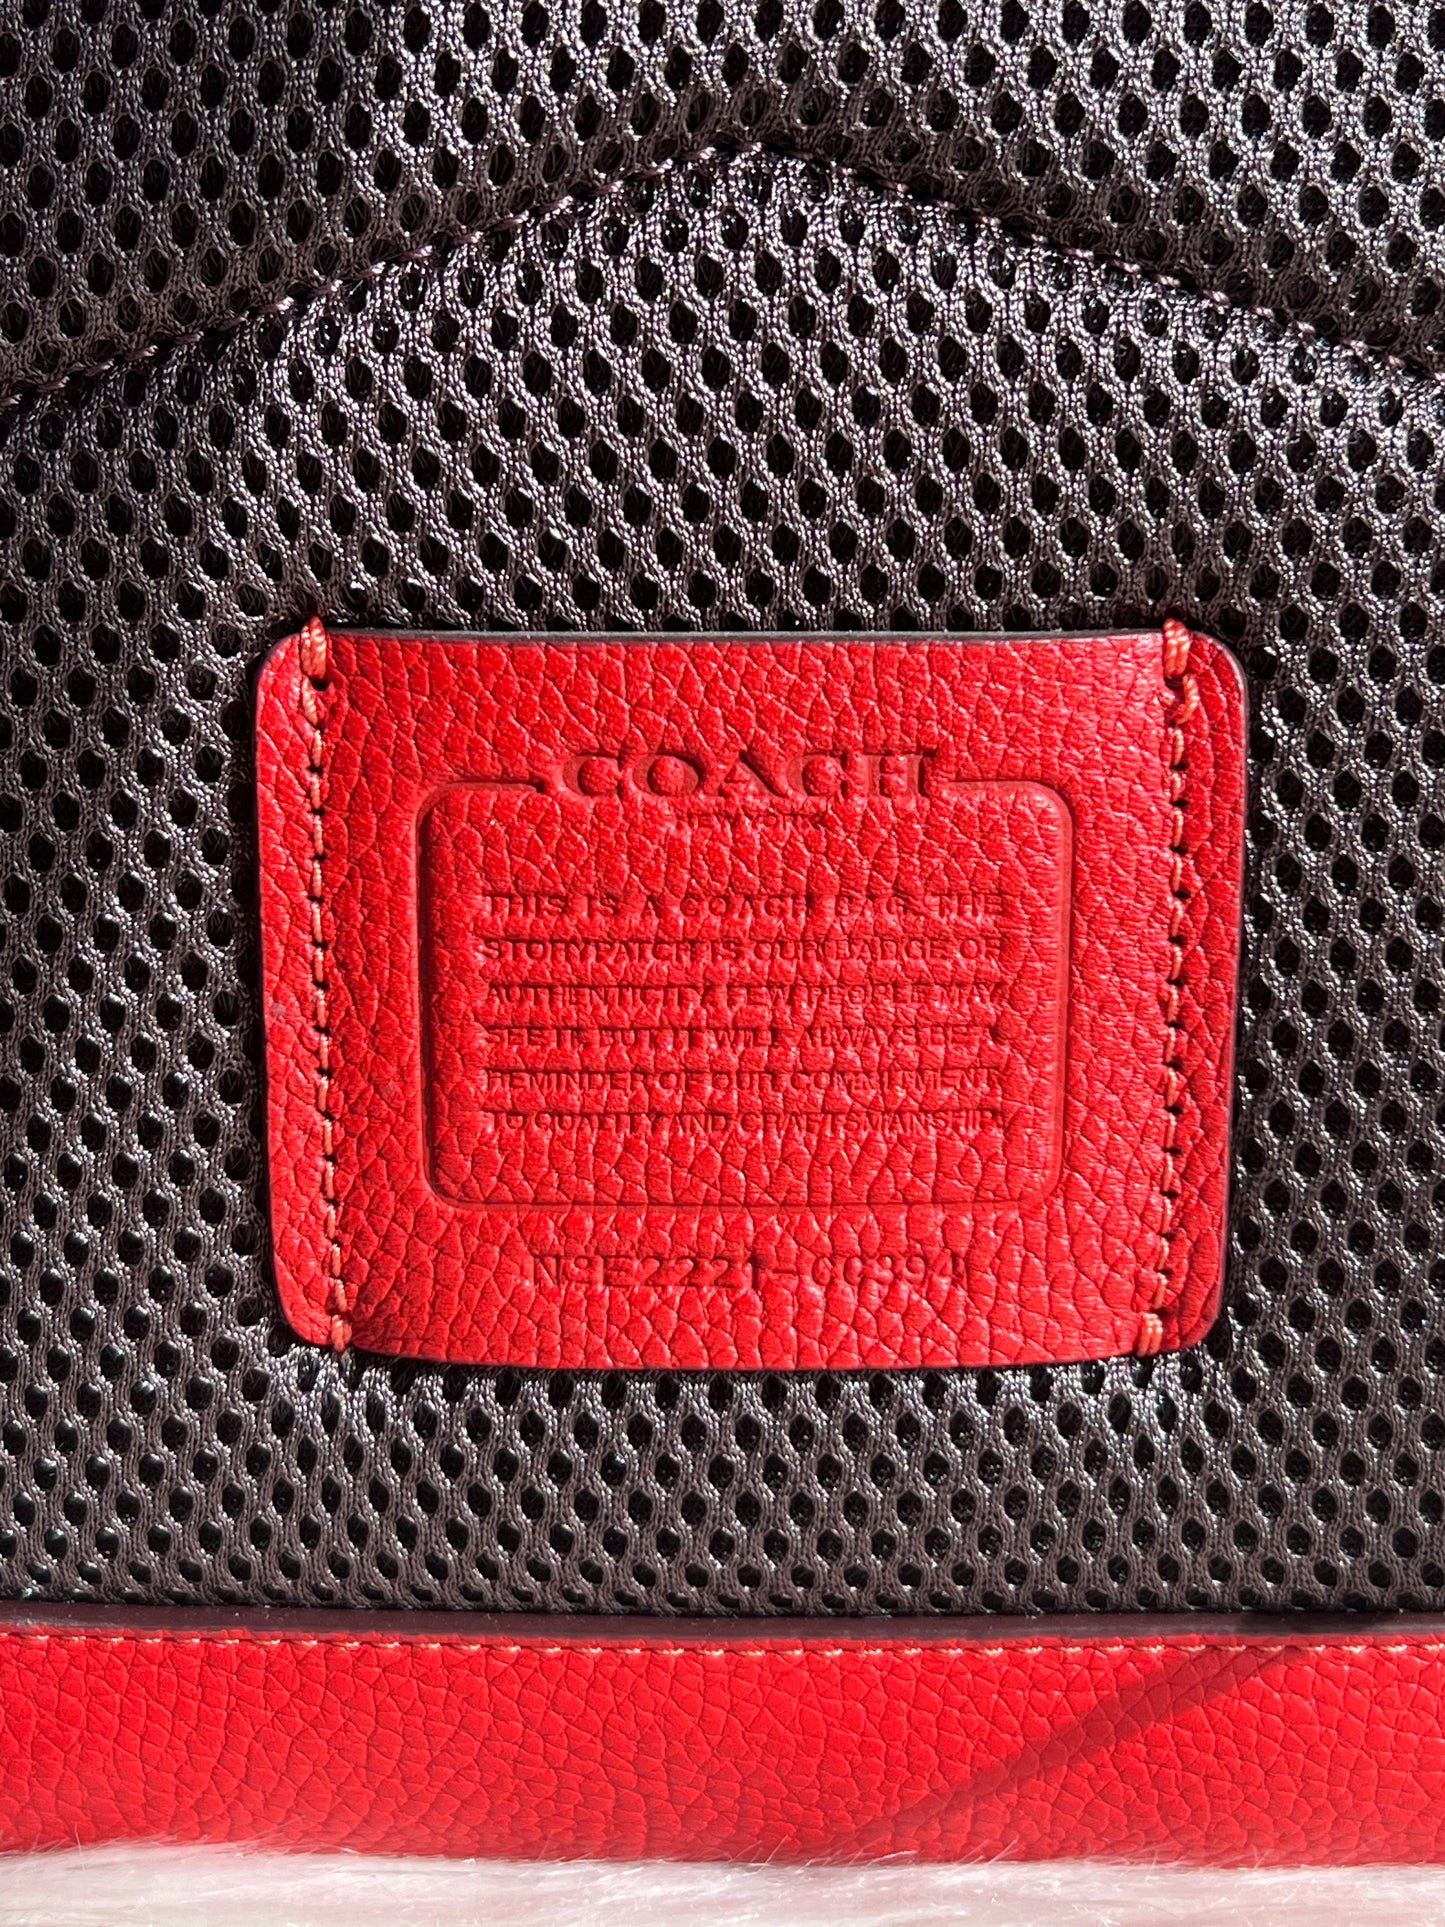 Coach Charter Backpack 24 In Signature Leather